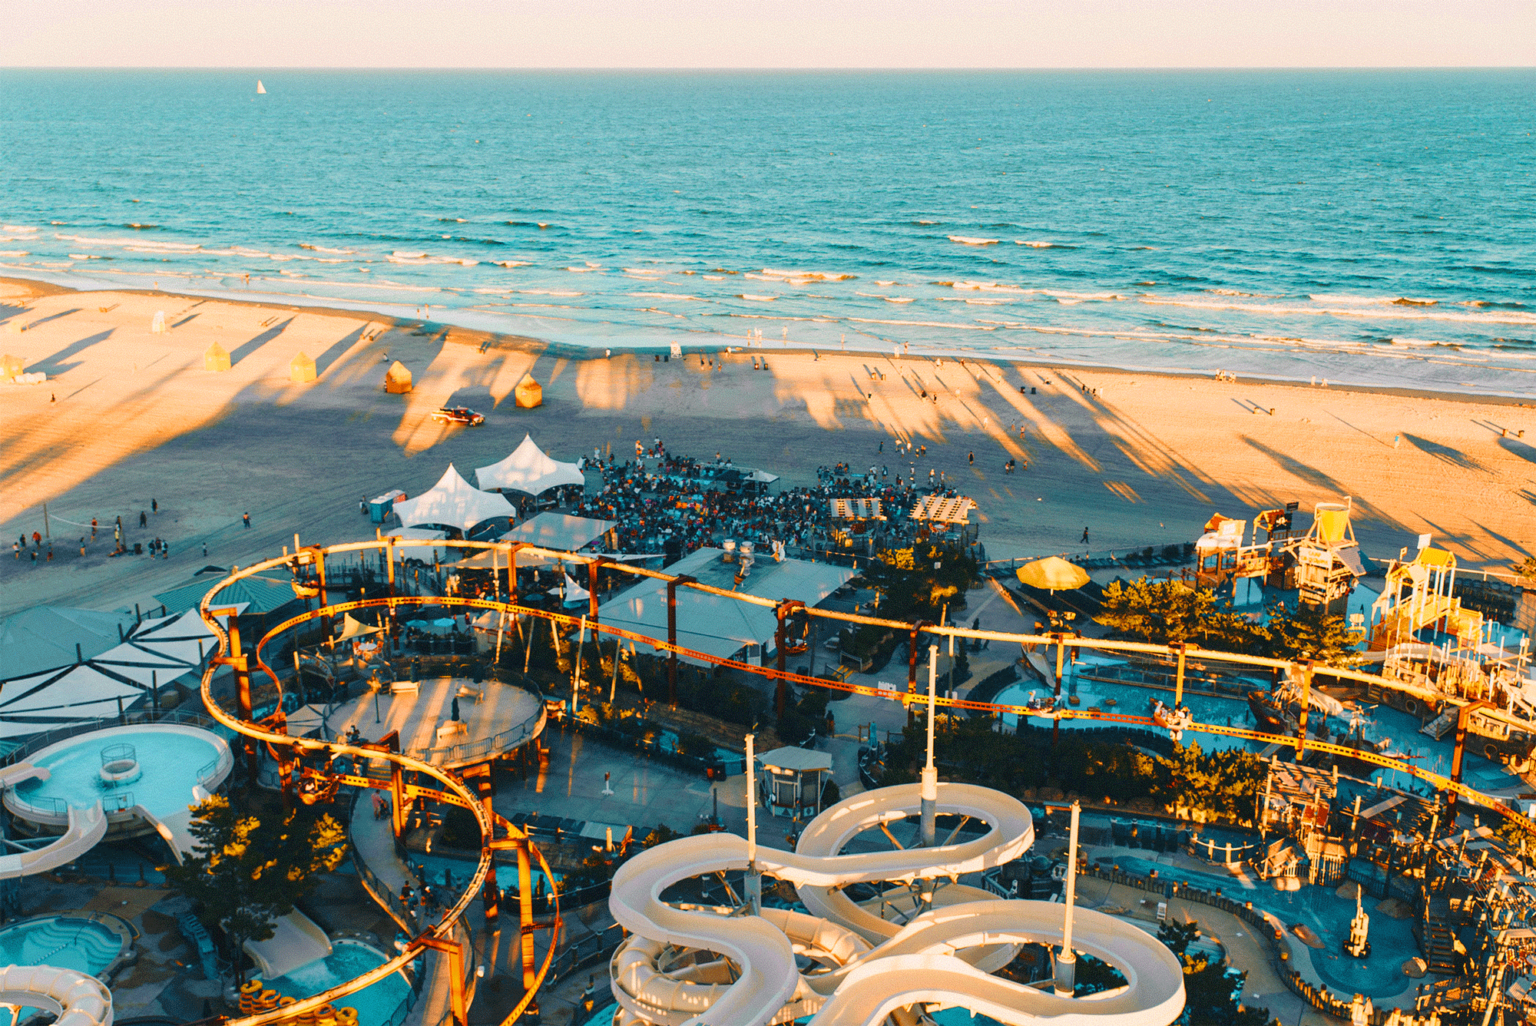 Aerial view of Wildwood New Jersey waterpark near our beachfront hotel in Wildwood Crest